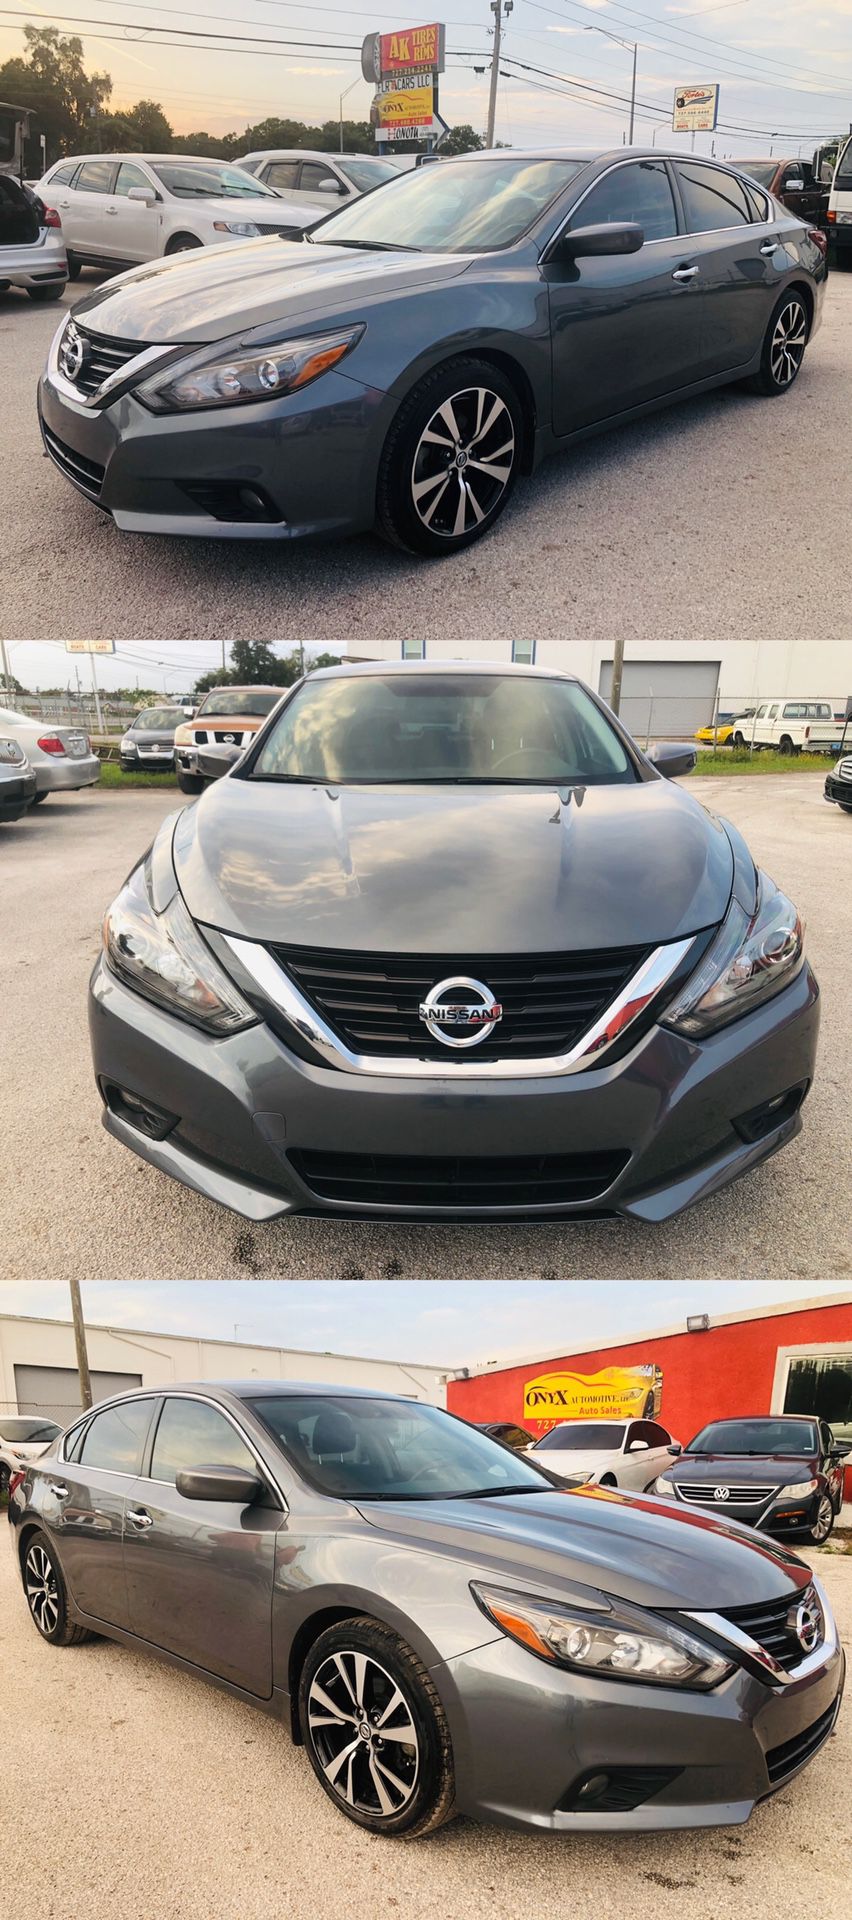 2016 Nissan Altima SR 48k Miles Leather Camera Perfect Trades Welcome Open 7 days